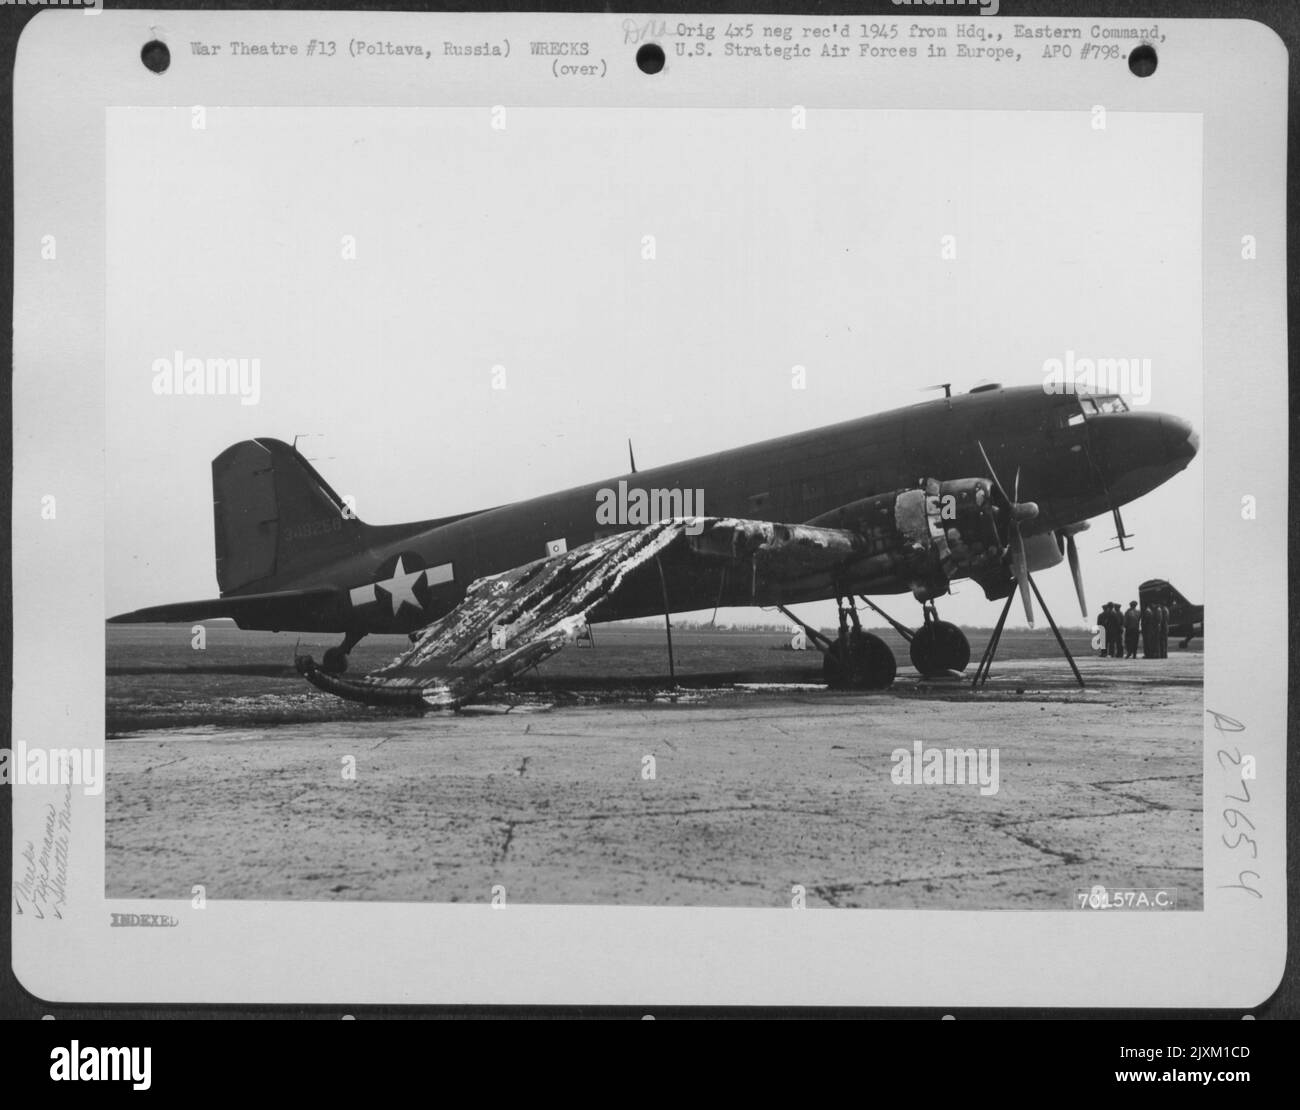 The wing of the Douglas C-47 'LADY HELEN' was damaged by fire when the wing was being washed down with gasoline on 30 April 1945 at Poltava, Airbase, a shuttle mission base in Russia. Stock Photo